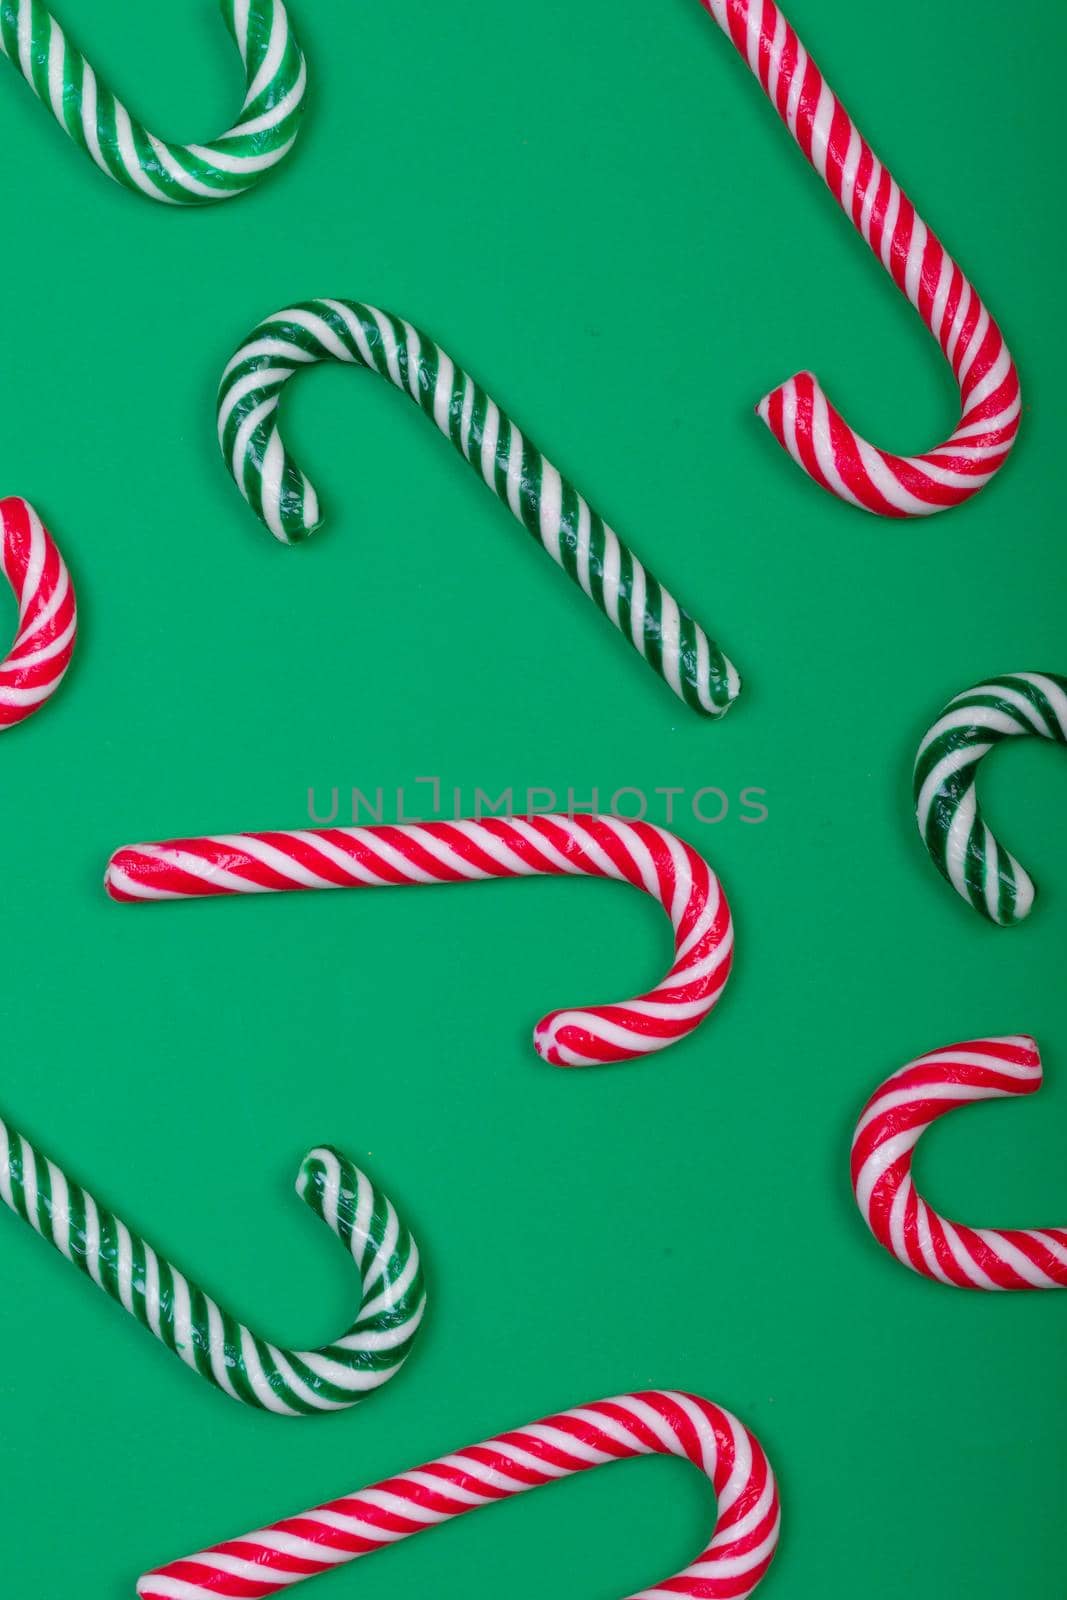 Composition of multiple green and red candy canes on green background. christmas, tradition and celebration concept.